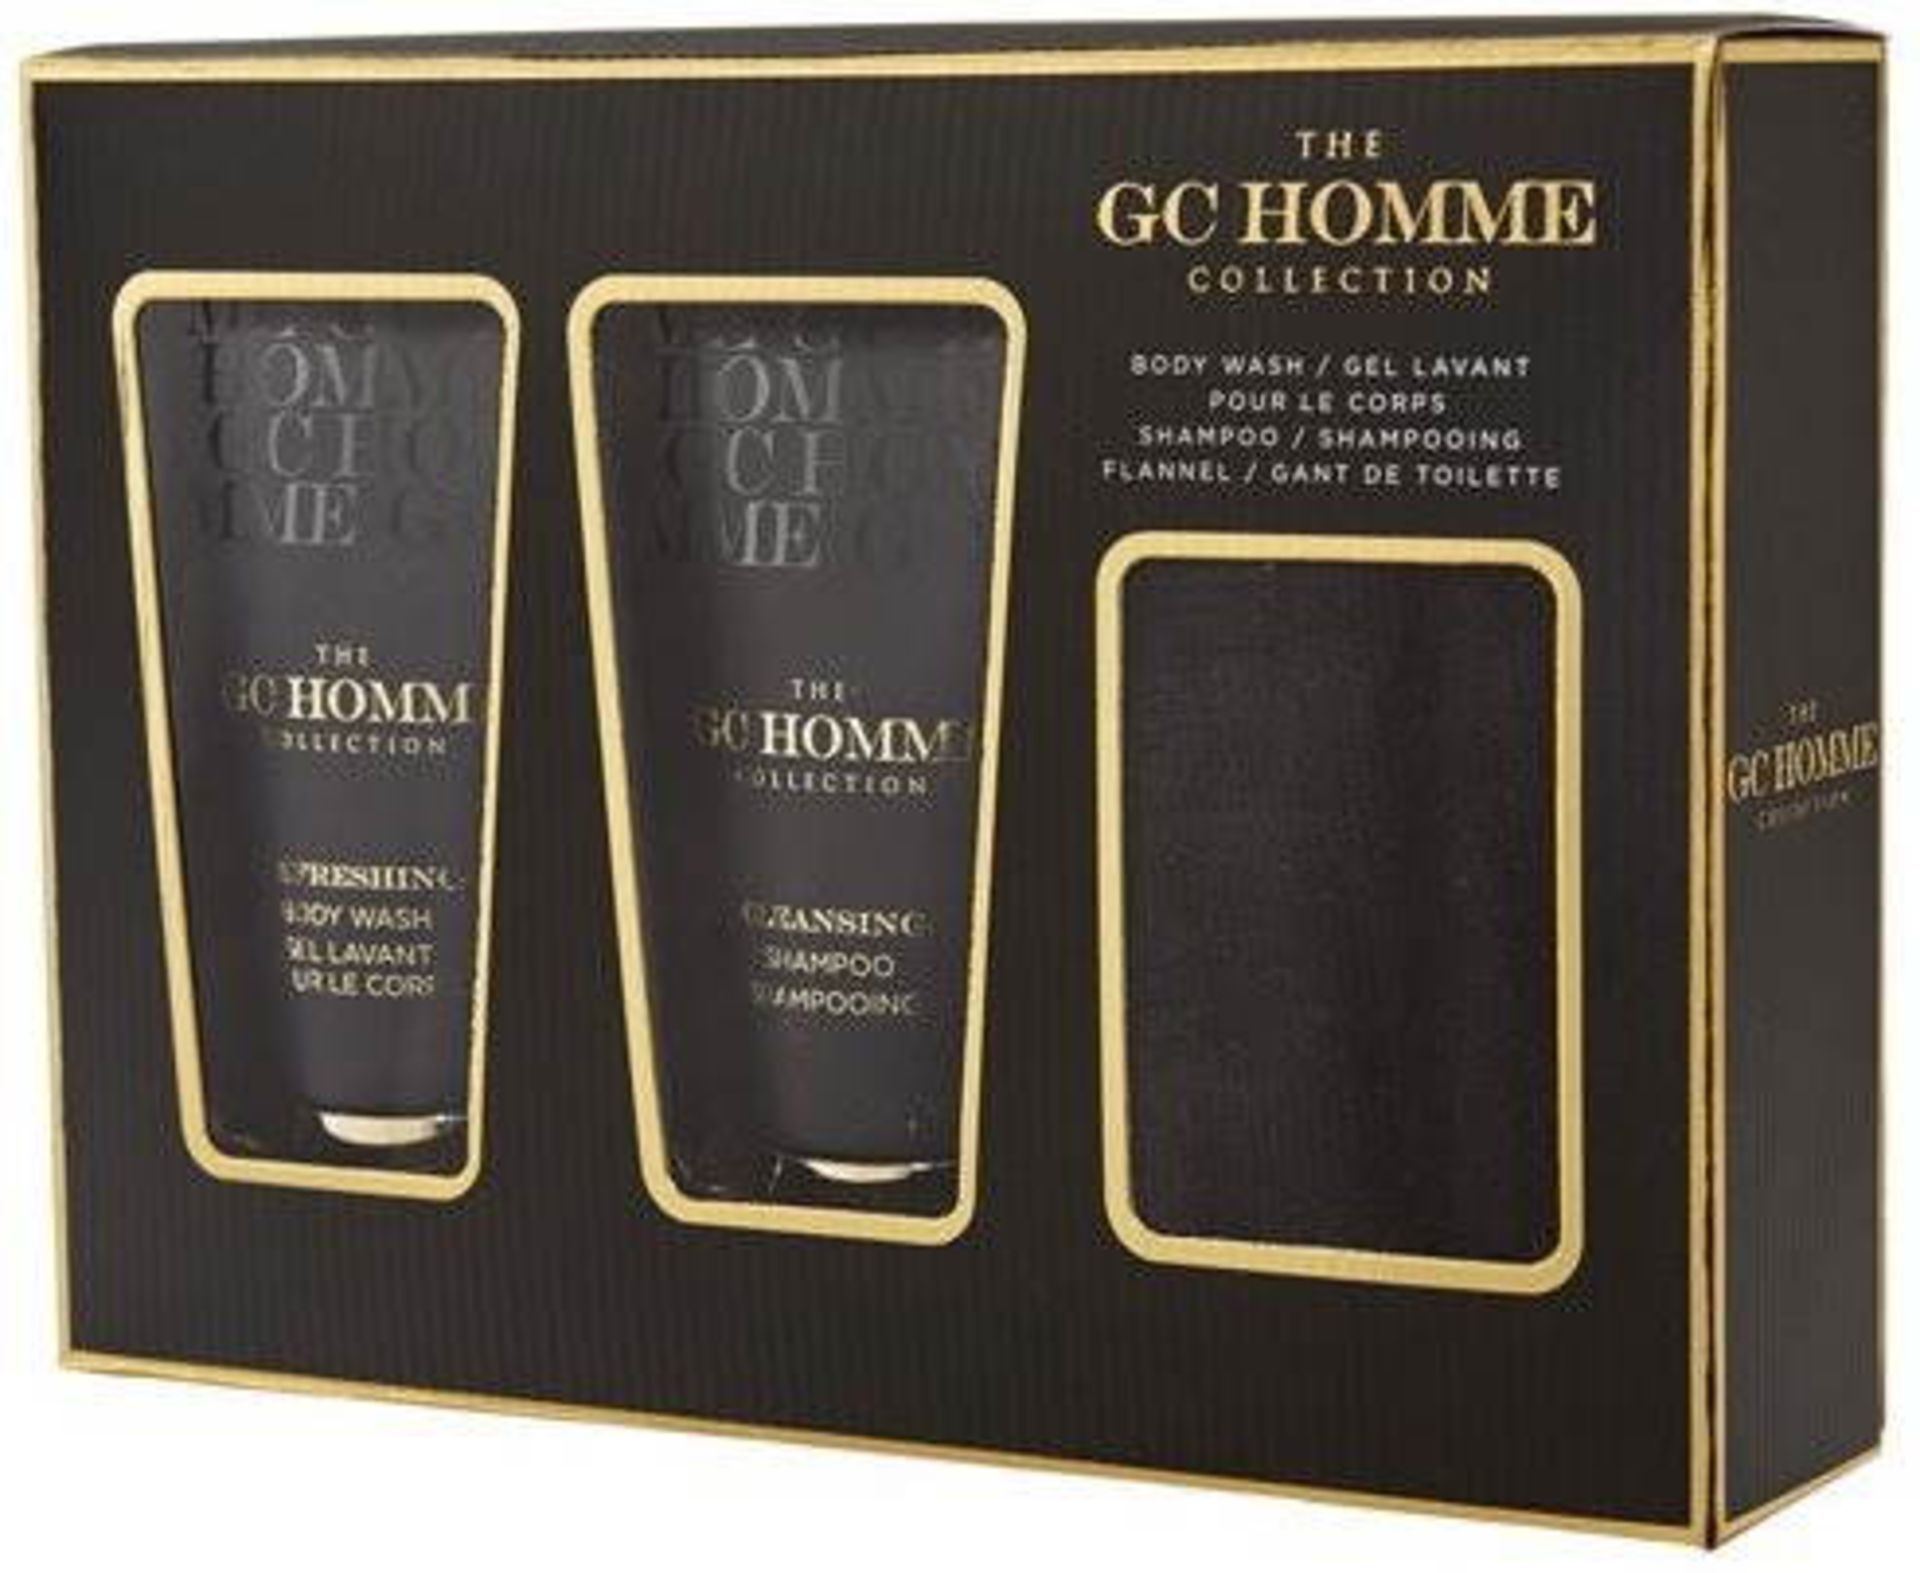 V Brand New Grace Cole Perfection GC Homme Collection Gift Pack Including Body Wash - Shampoo And